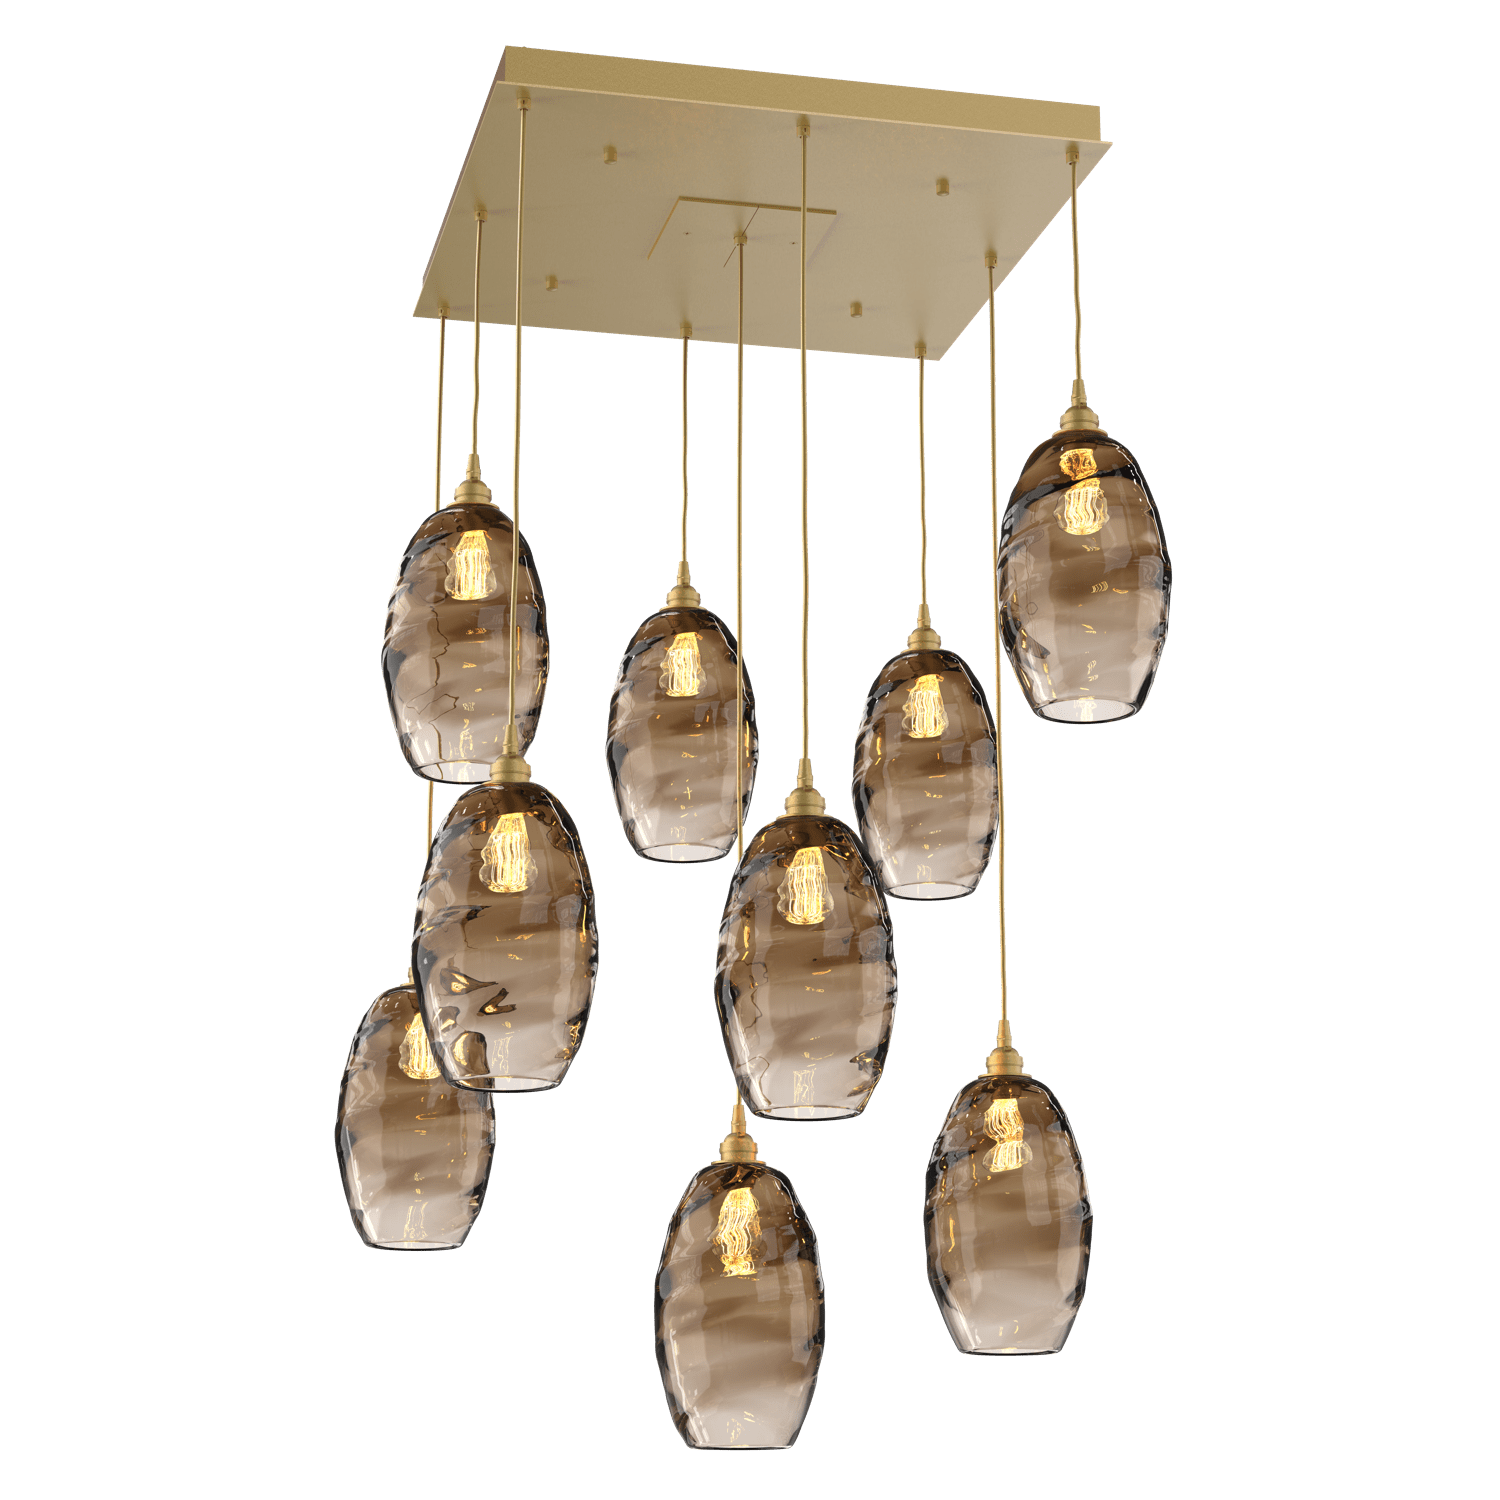 CHB0035-09-GB-OB-Hammerton-Studio-Optic-Blown-Glass-Elisse-9-light-square-pendant-chandelier-with-gilded-brass-finish-and-optic-bronze-blown-glass-shades-and-incandescent-lamping